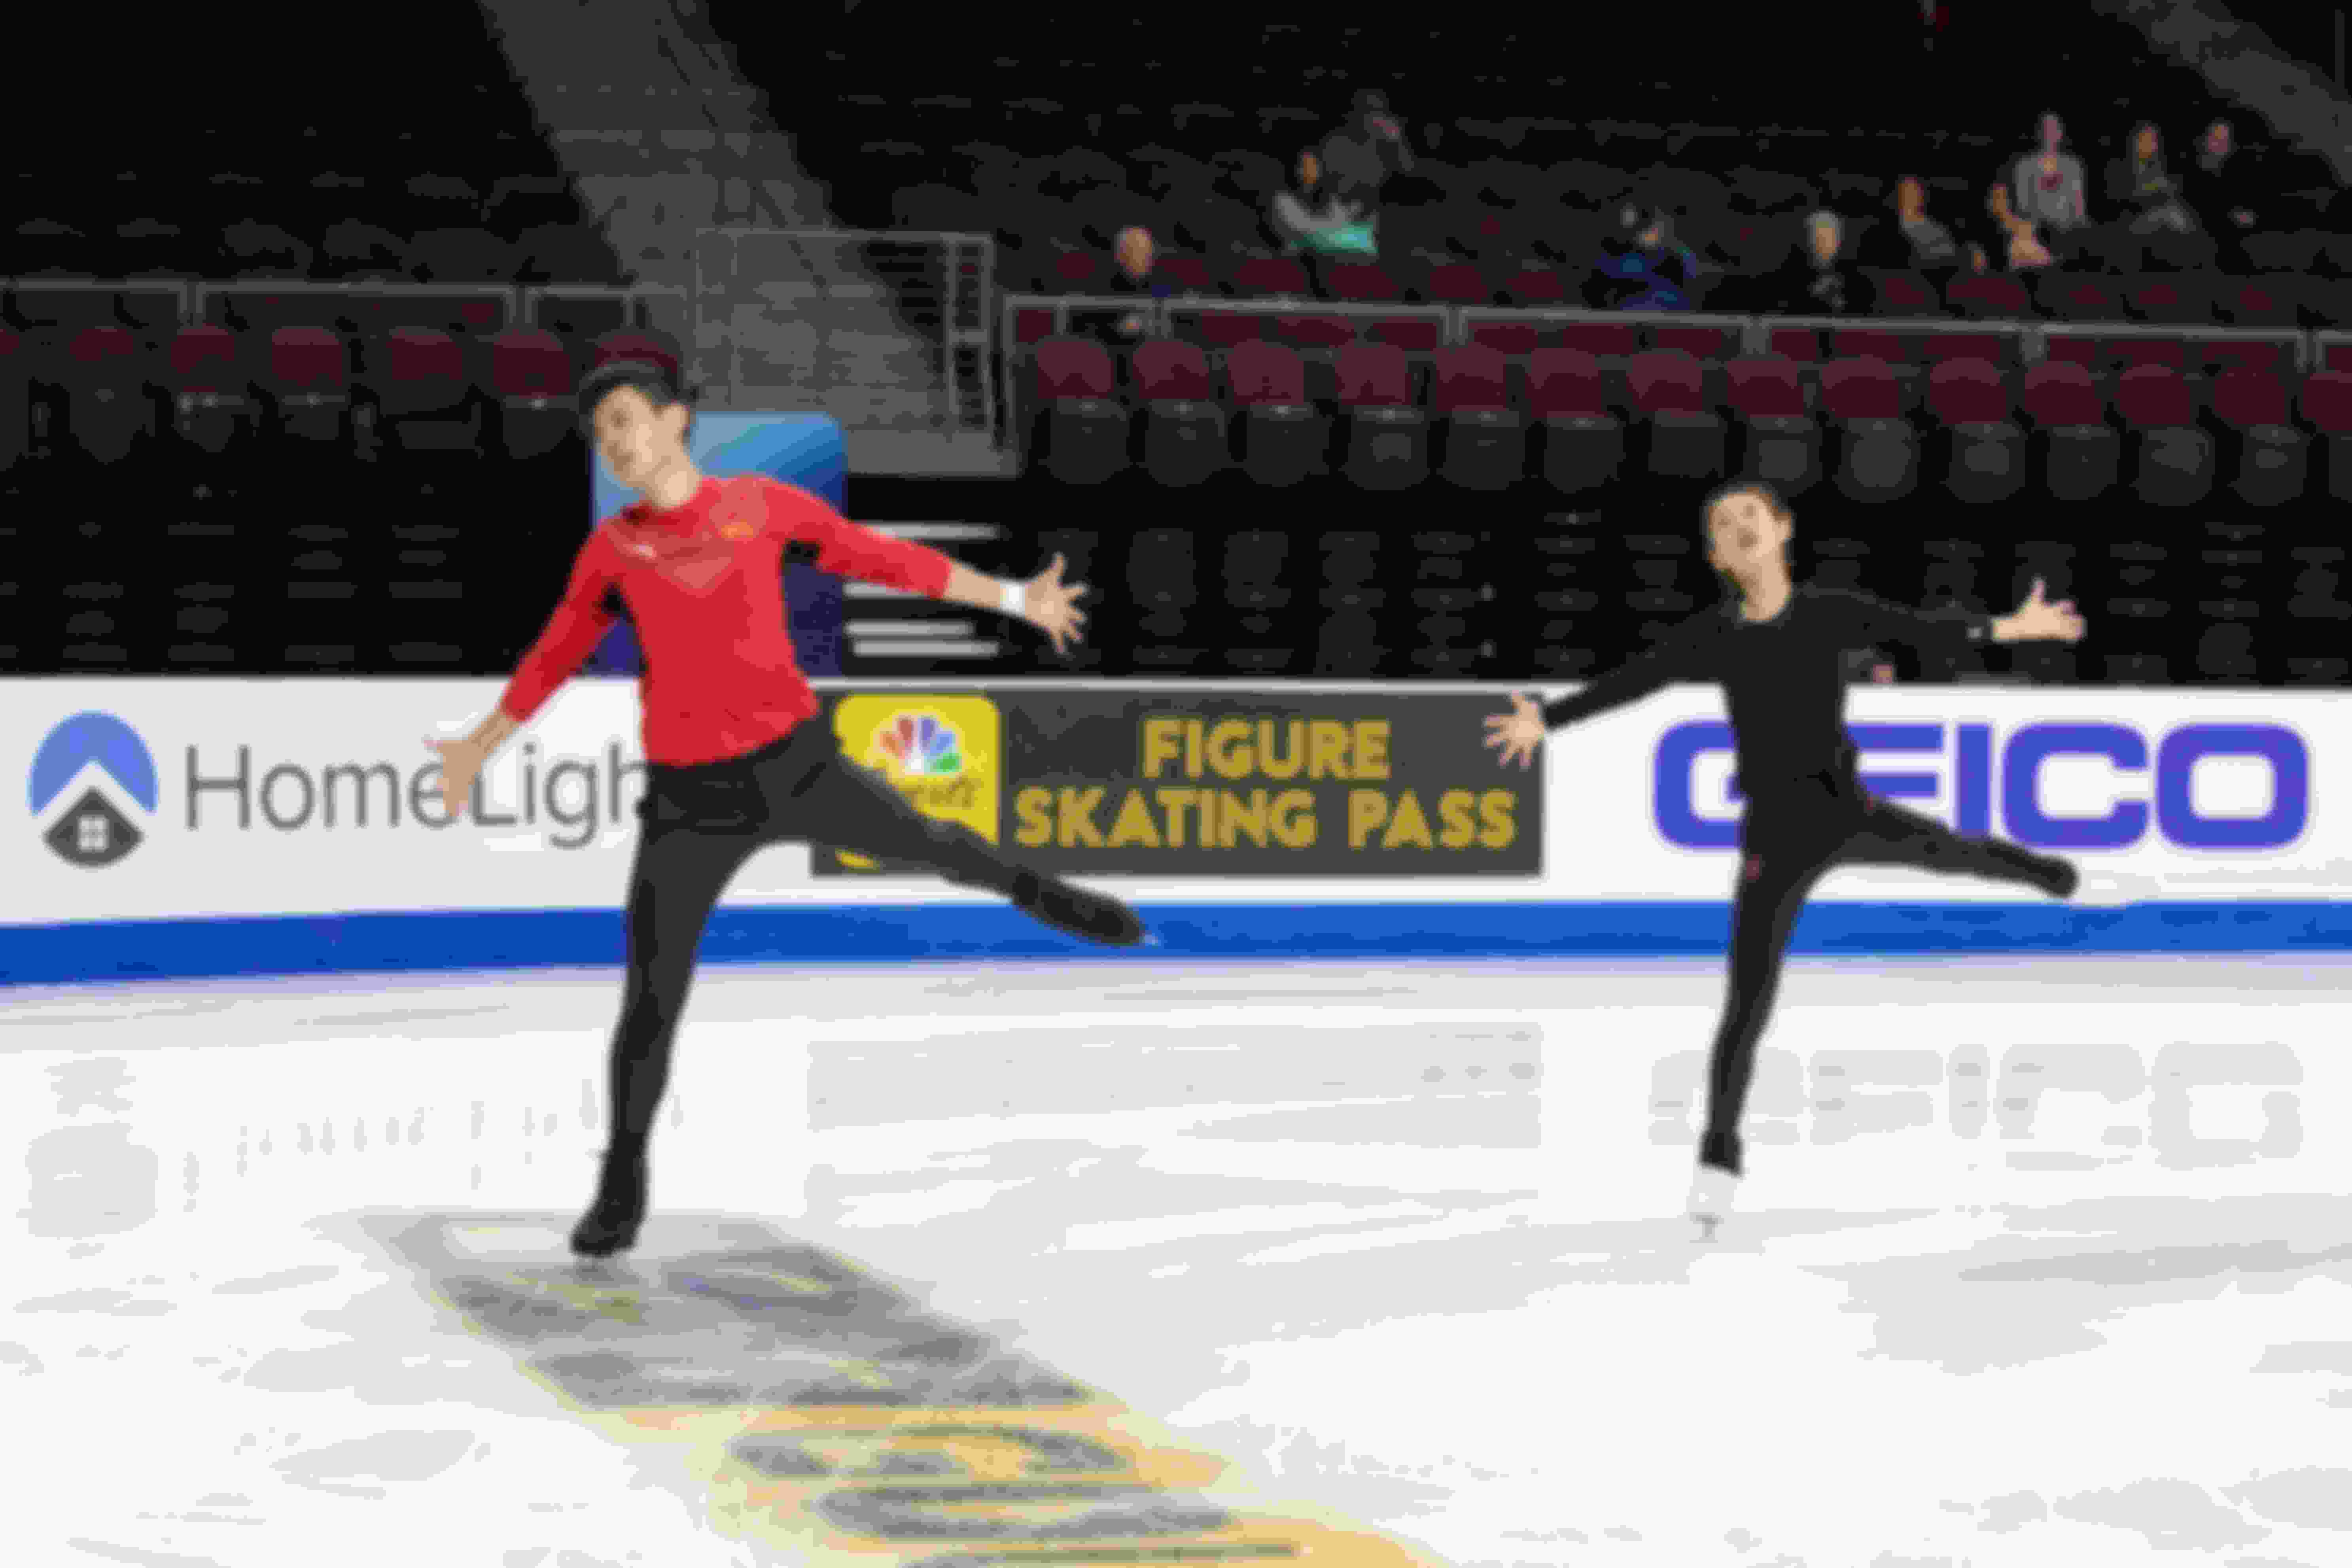 Cheng Peng and Yang Jin in practice at Skate America on Thursday